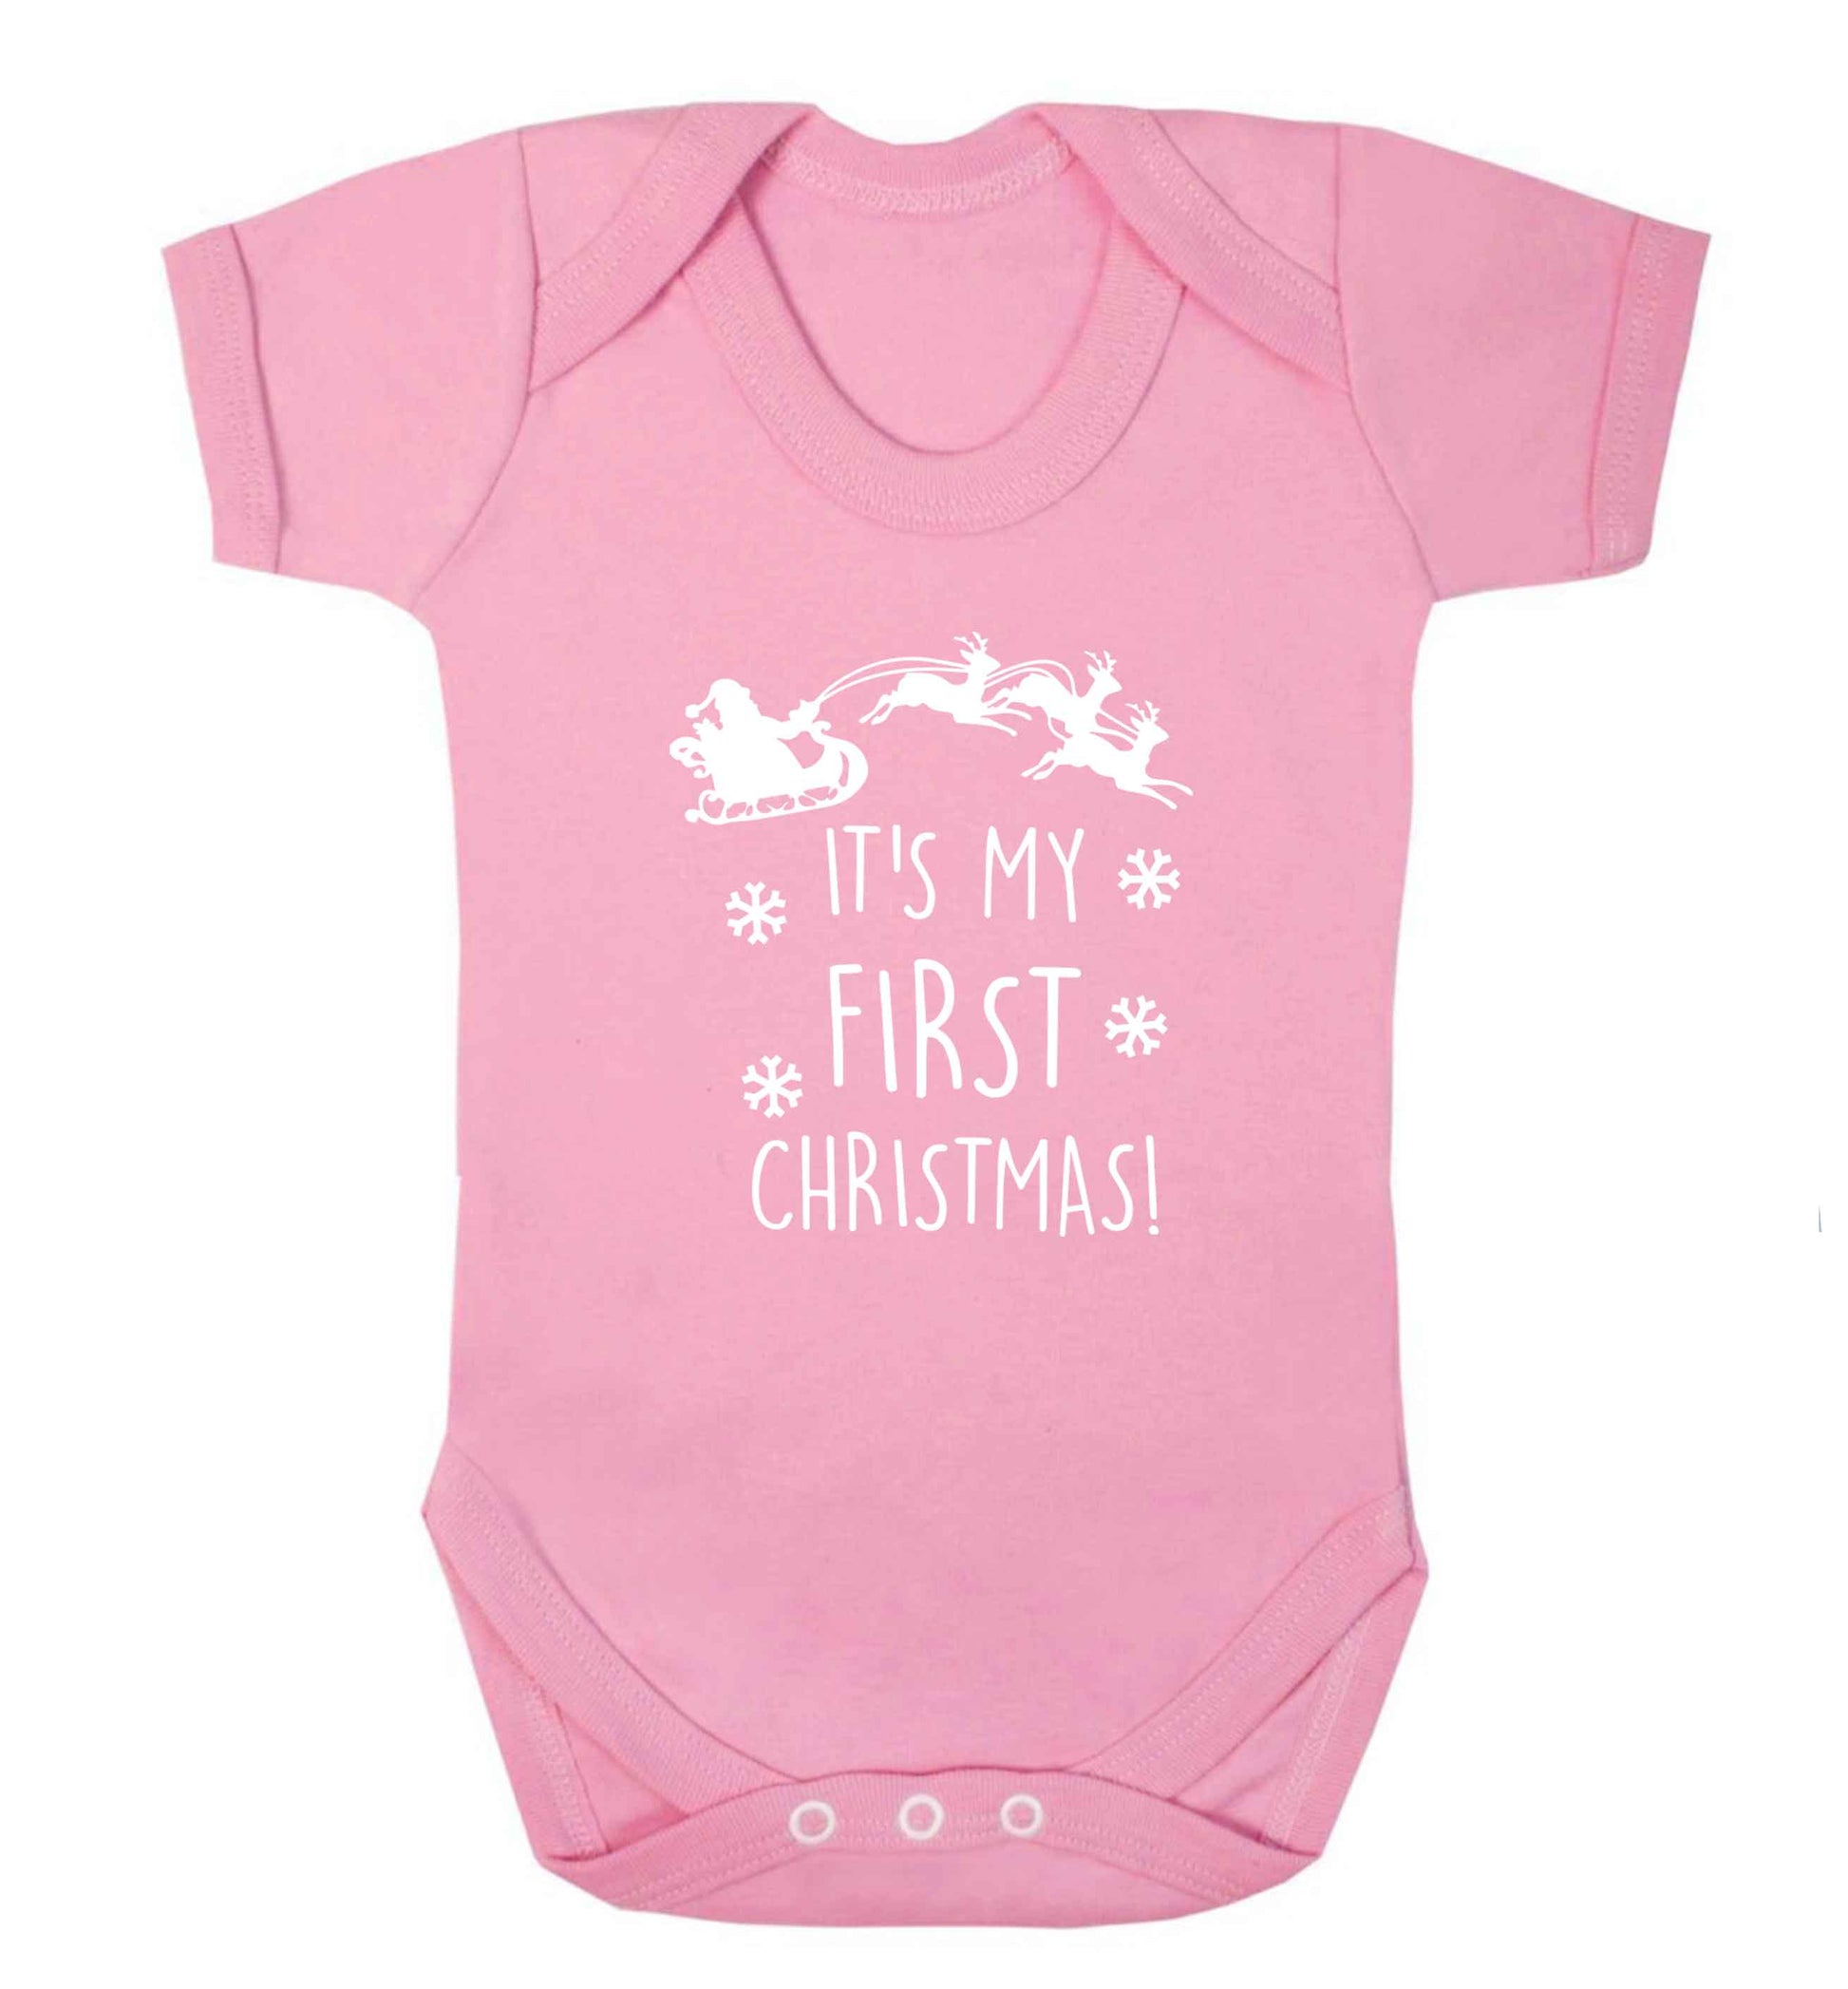 It's my first Christmas - Santa sleigh text baby vest pale pink 18-24 months